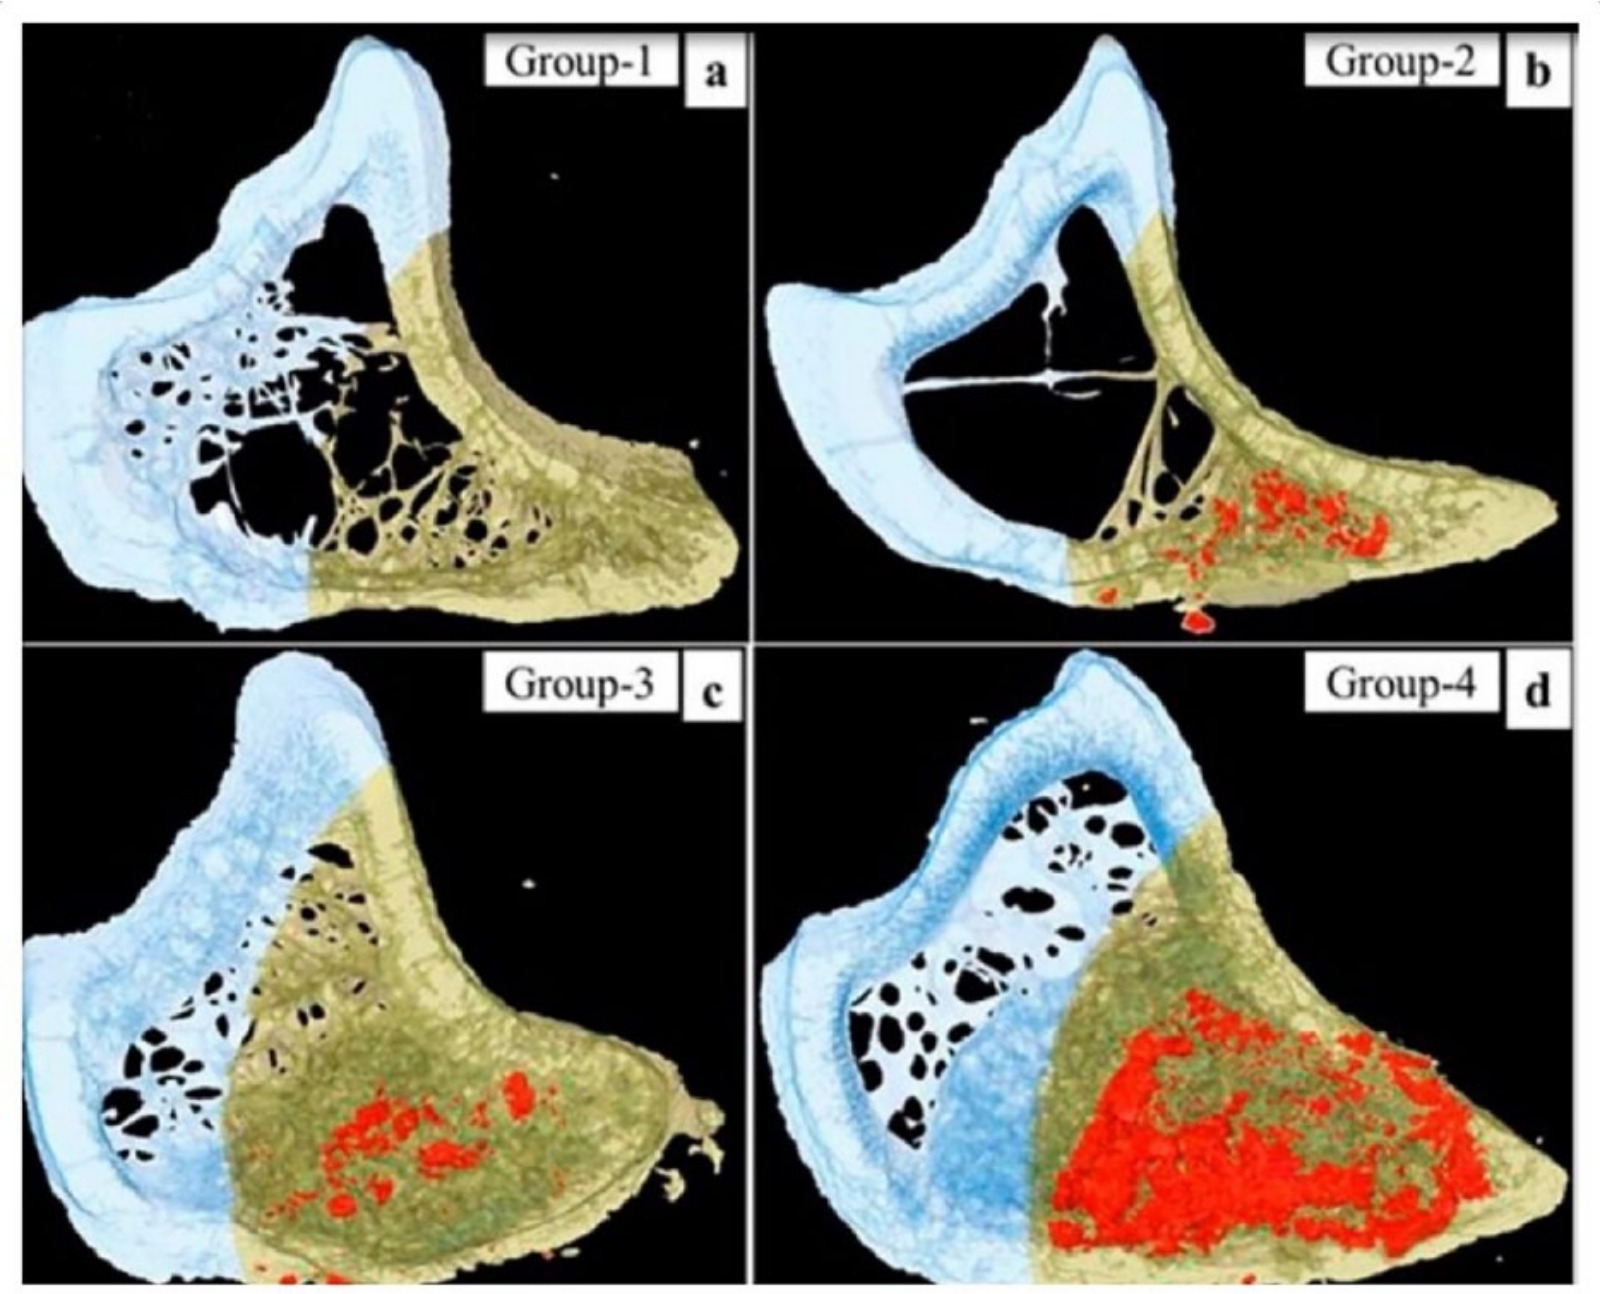 Fig. 3 
          
            Ex vivo micro-CT reconstructions in the tibia defect model. Representation of extensive bone formation (red colour) using zoledronate (0.2 mM) compared with bioactive protein fraction derived from Saos2 cell lines. (a) Group 1 (control), (b) Group 2 (gelatin-cement), (c) Group 3 (gelatin-cement + Saos2 fraction), (d) Group 4 (gelatin-cement + ZA). Reproduced from Teotia AK, Gupta A, Raina DB, Lidgren L, Kumar A. Gelatin-modified bone substitute with bioactive molecules enhance cellular interactions and bone regeneration. ACS Appl Mater Interfaces 2016;8:10775–10787 (with permission from the publisher; American Chemical Society).
        